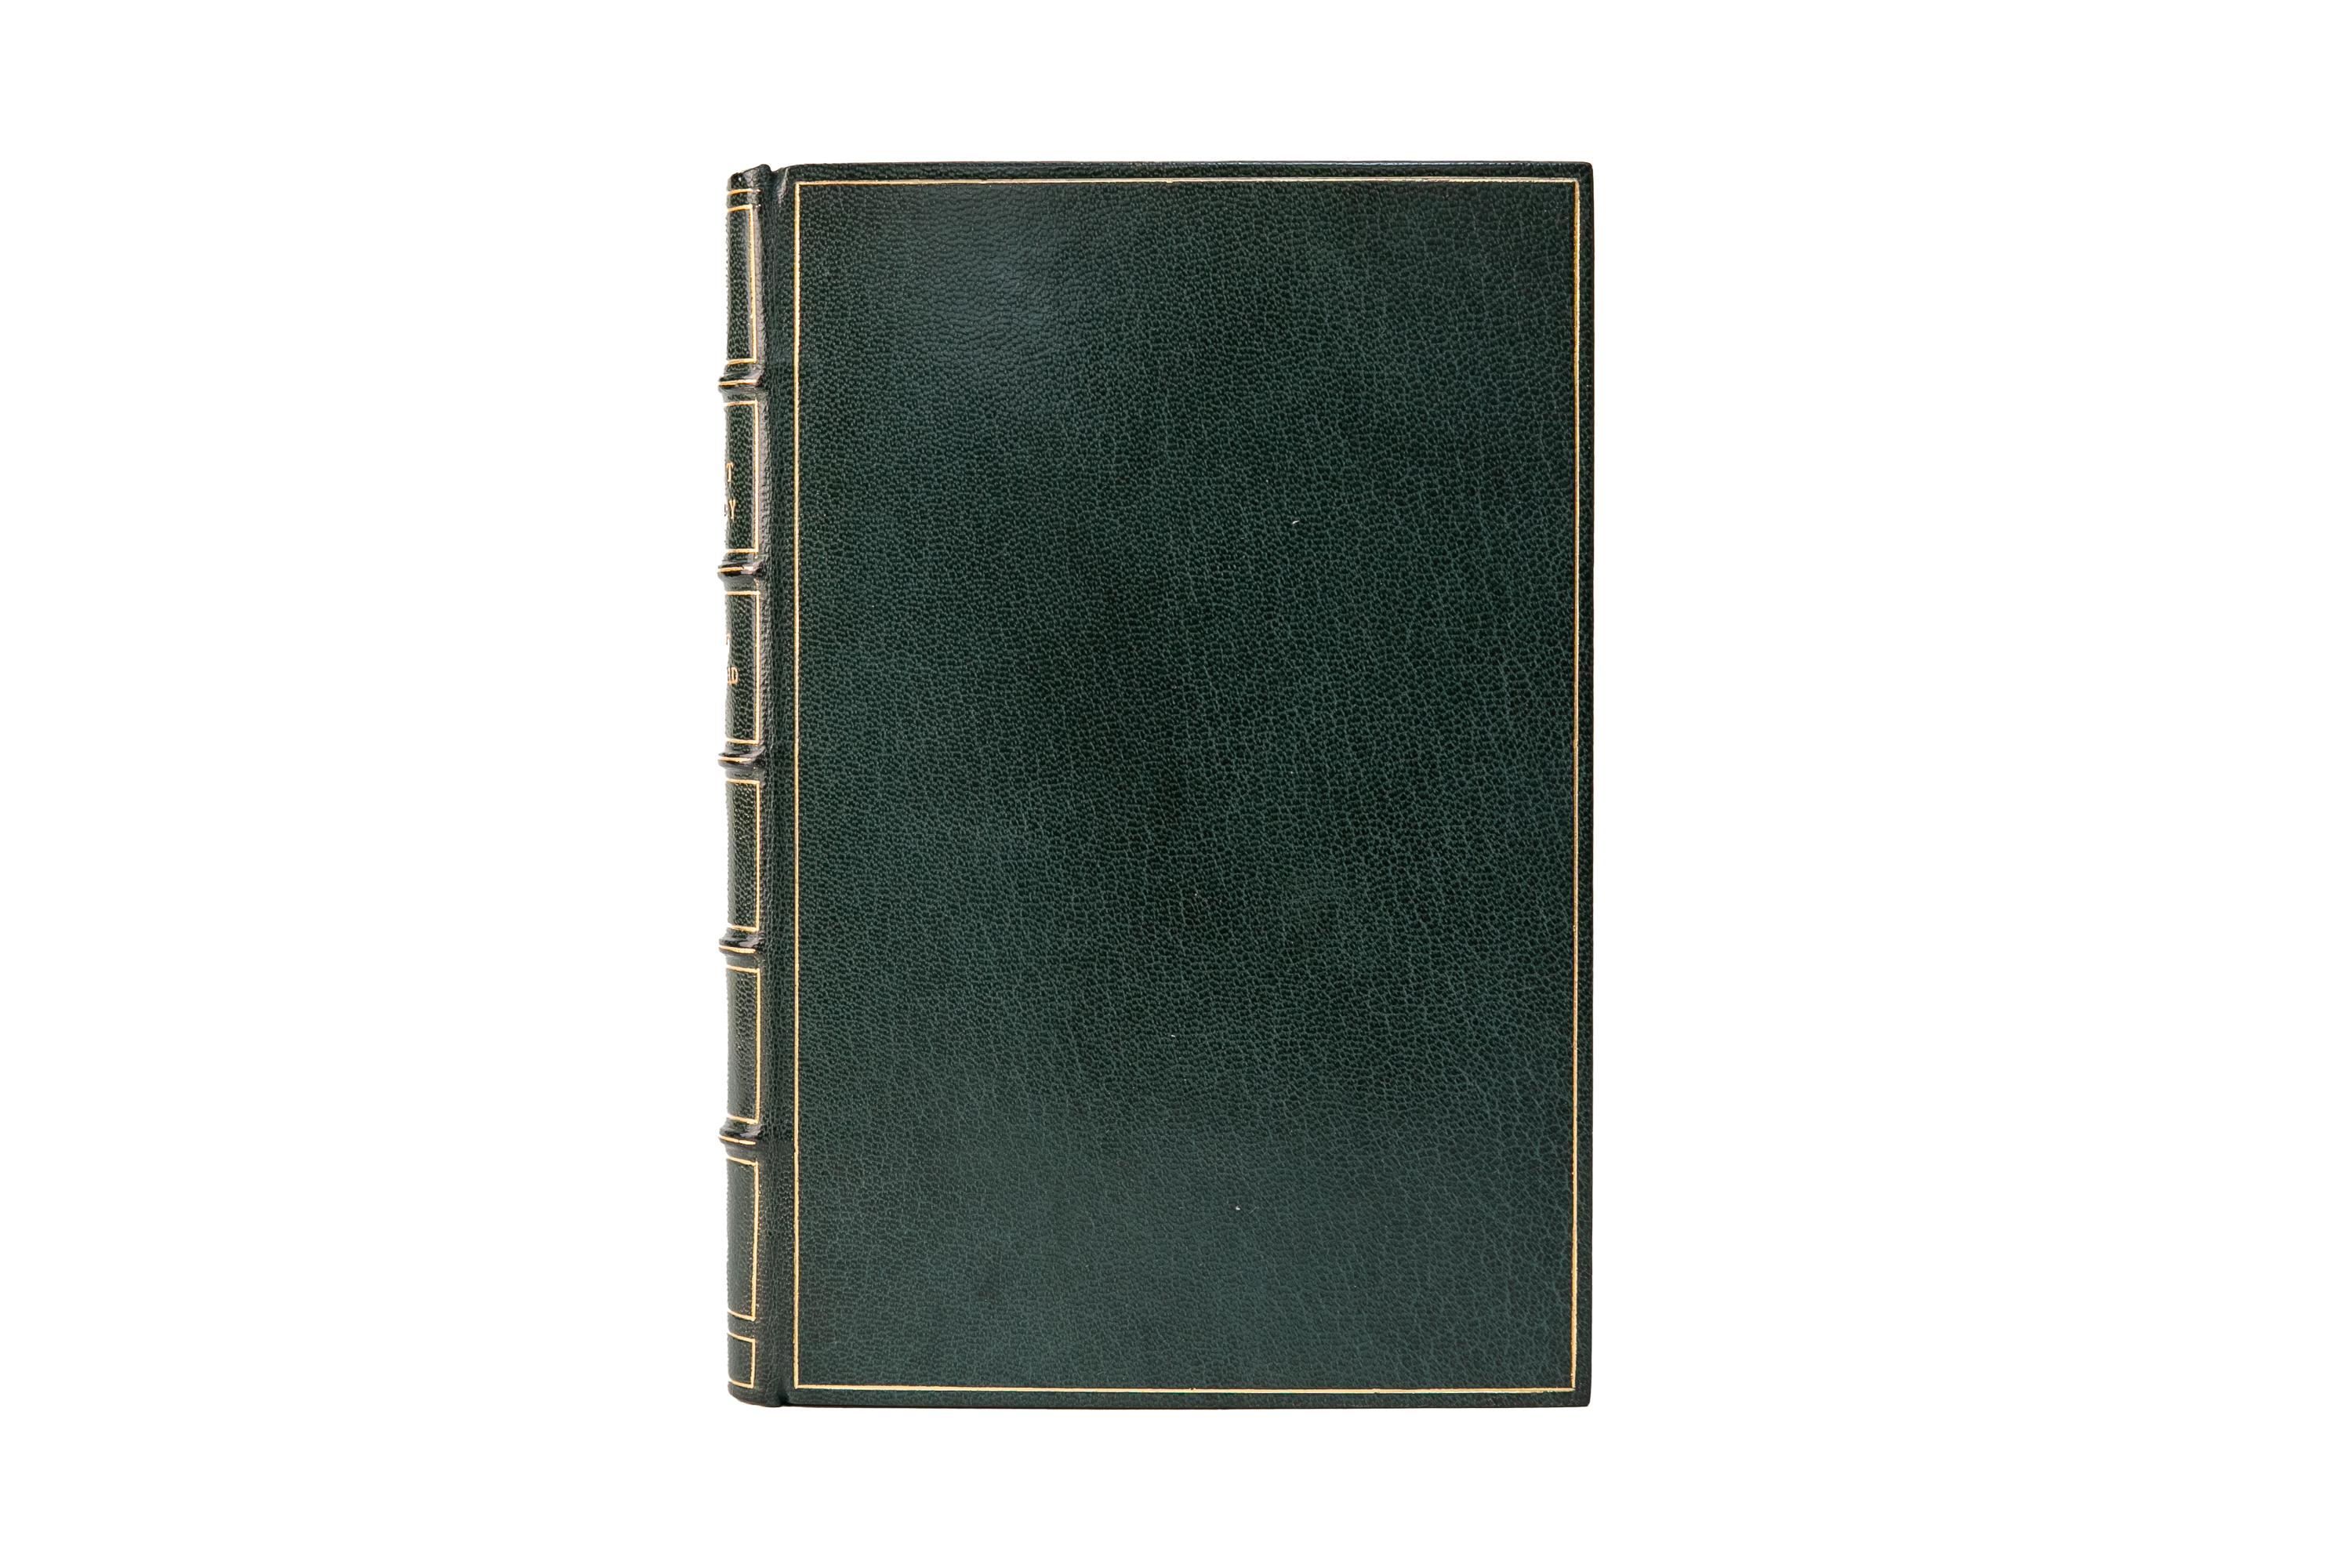 1 Volume. F. Scott Fitzgerald, The Great Gatsby. First Edition. Bound by Bayntun Riviere in full green morocco with gilt-tooled detailing on the covers and raised band spine. All edges are gilt with gilt-tooled dentelles and marbled endpapers.